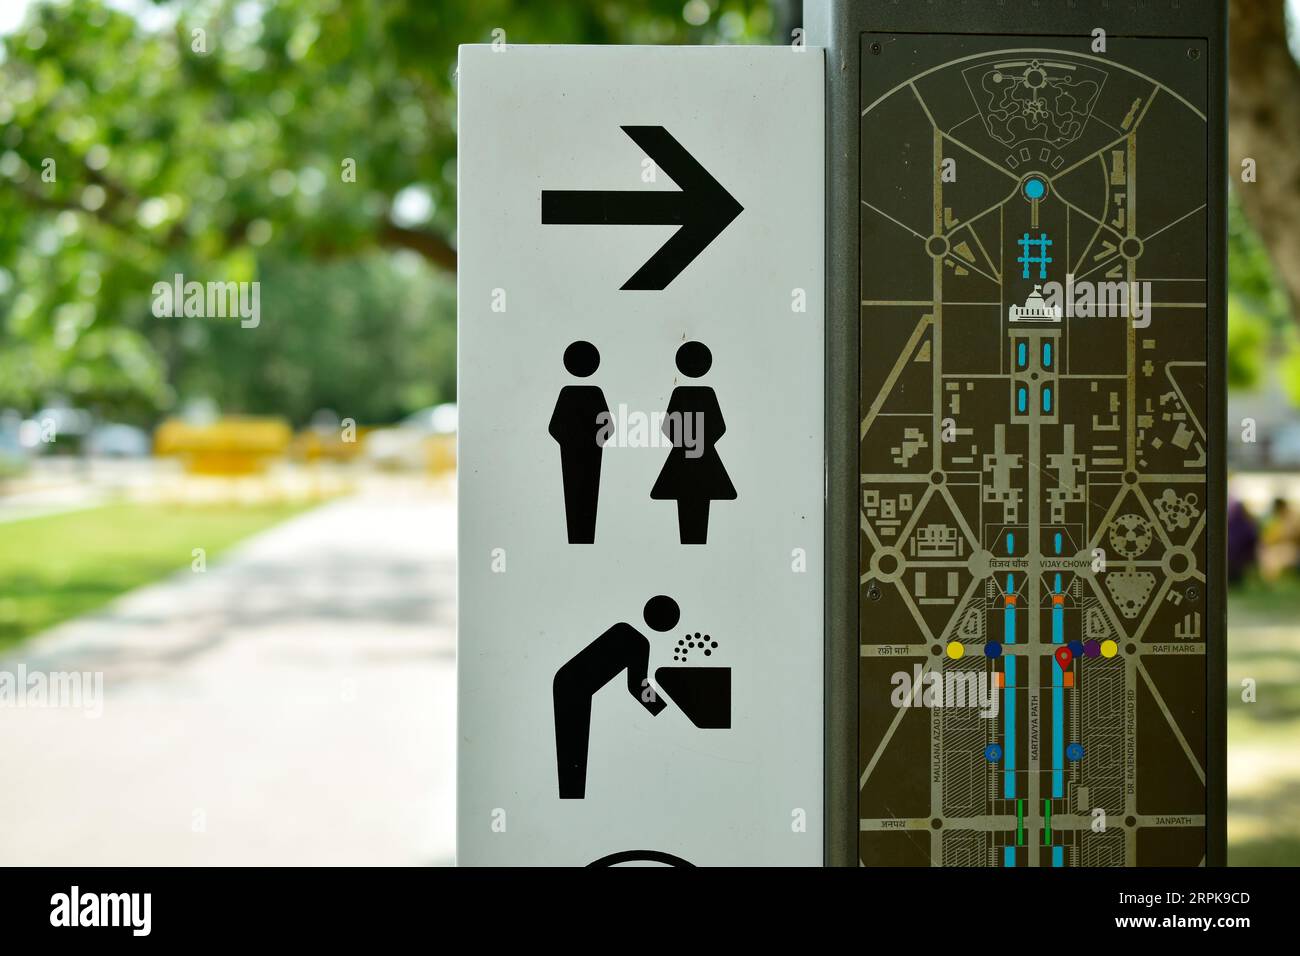 Maps with restroom and drinking water sign baord Stock Photo